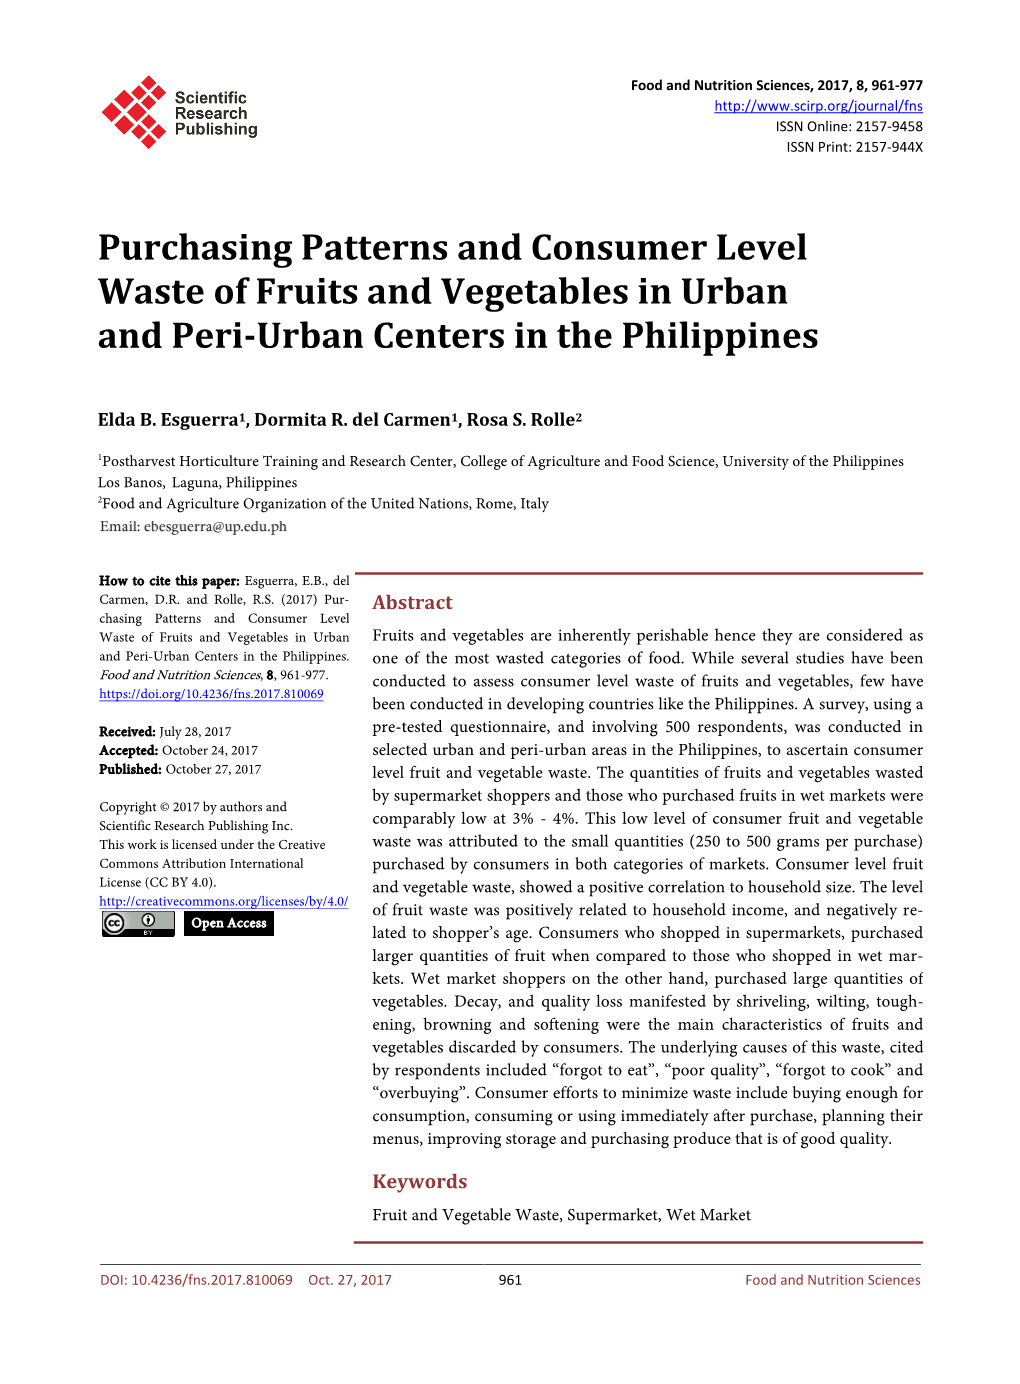 Purchasing Patterns and Consumer Level Waste of Fruits and Vegetables in Urban and Peri-Urban Centers in the Philippines